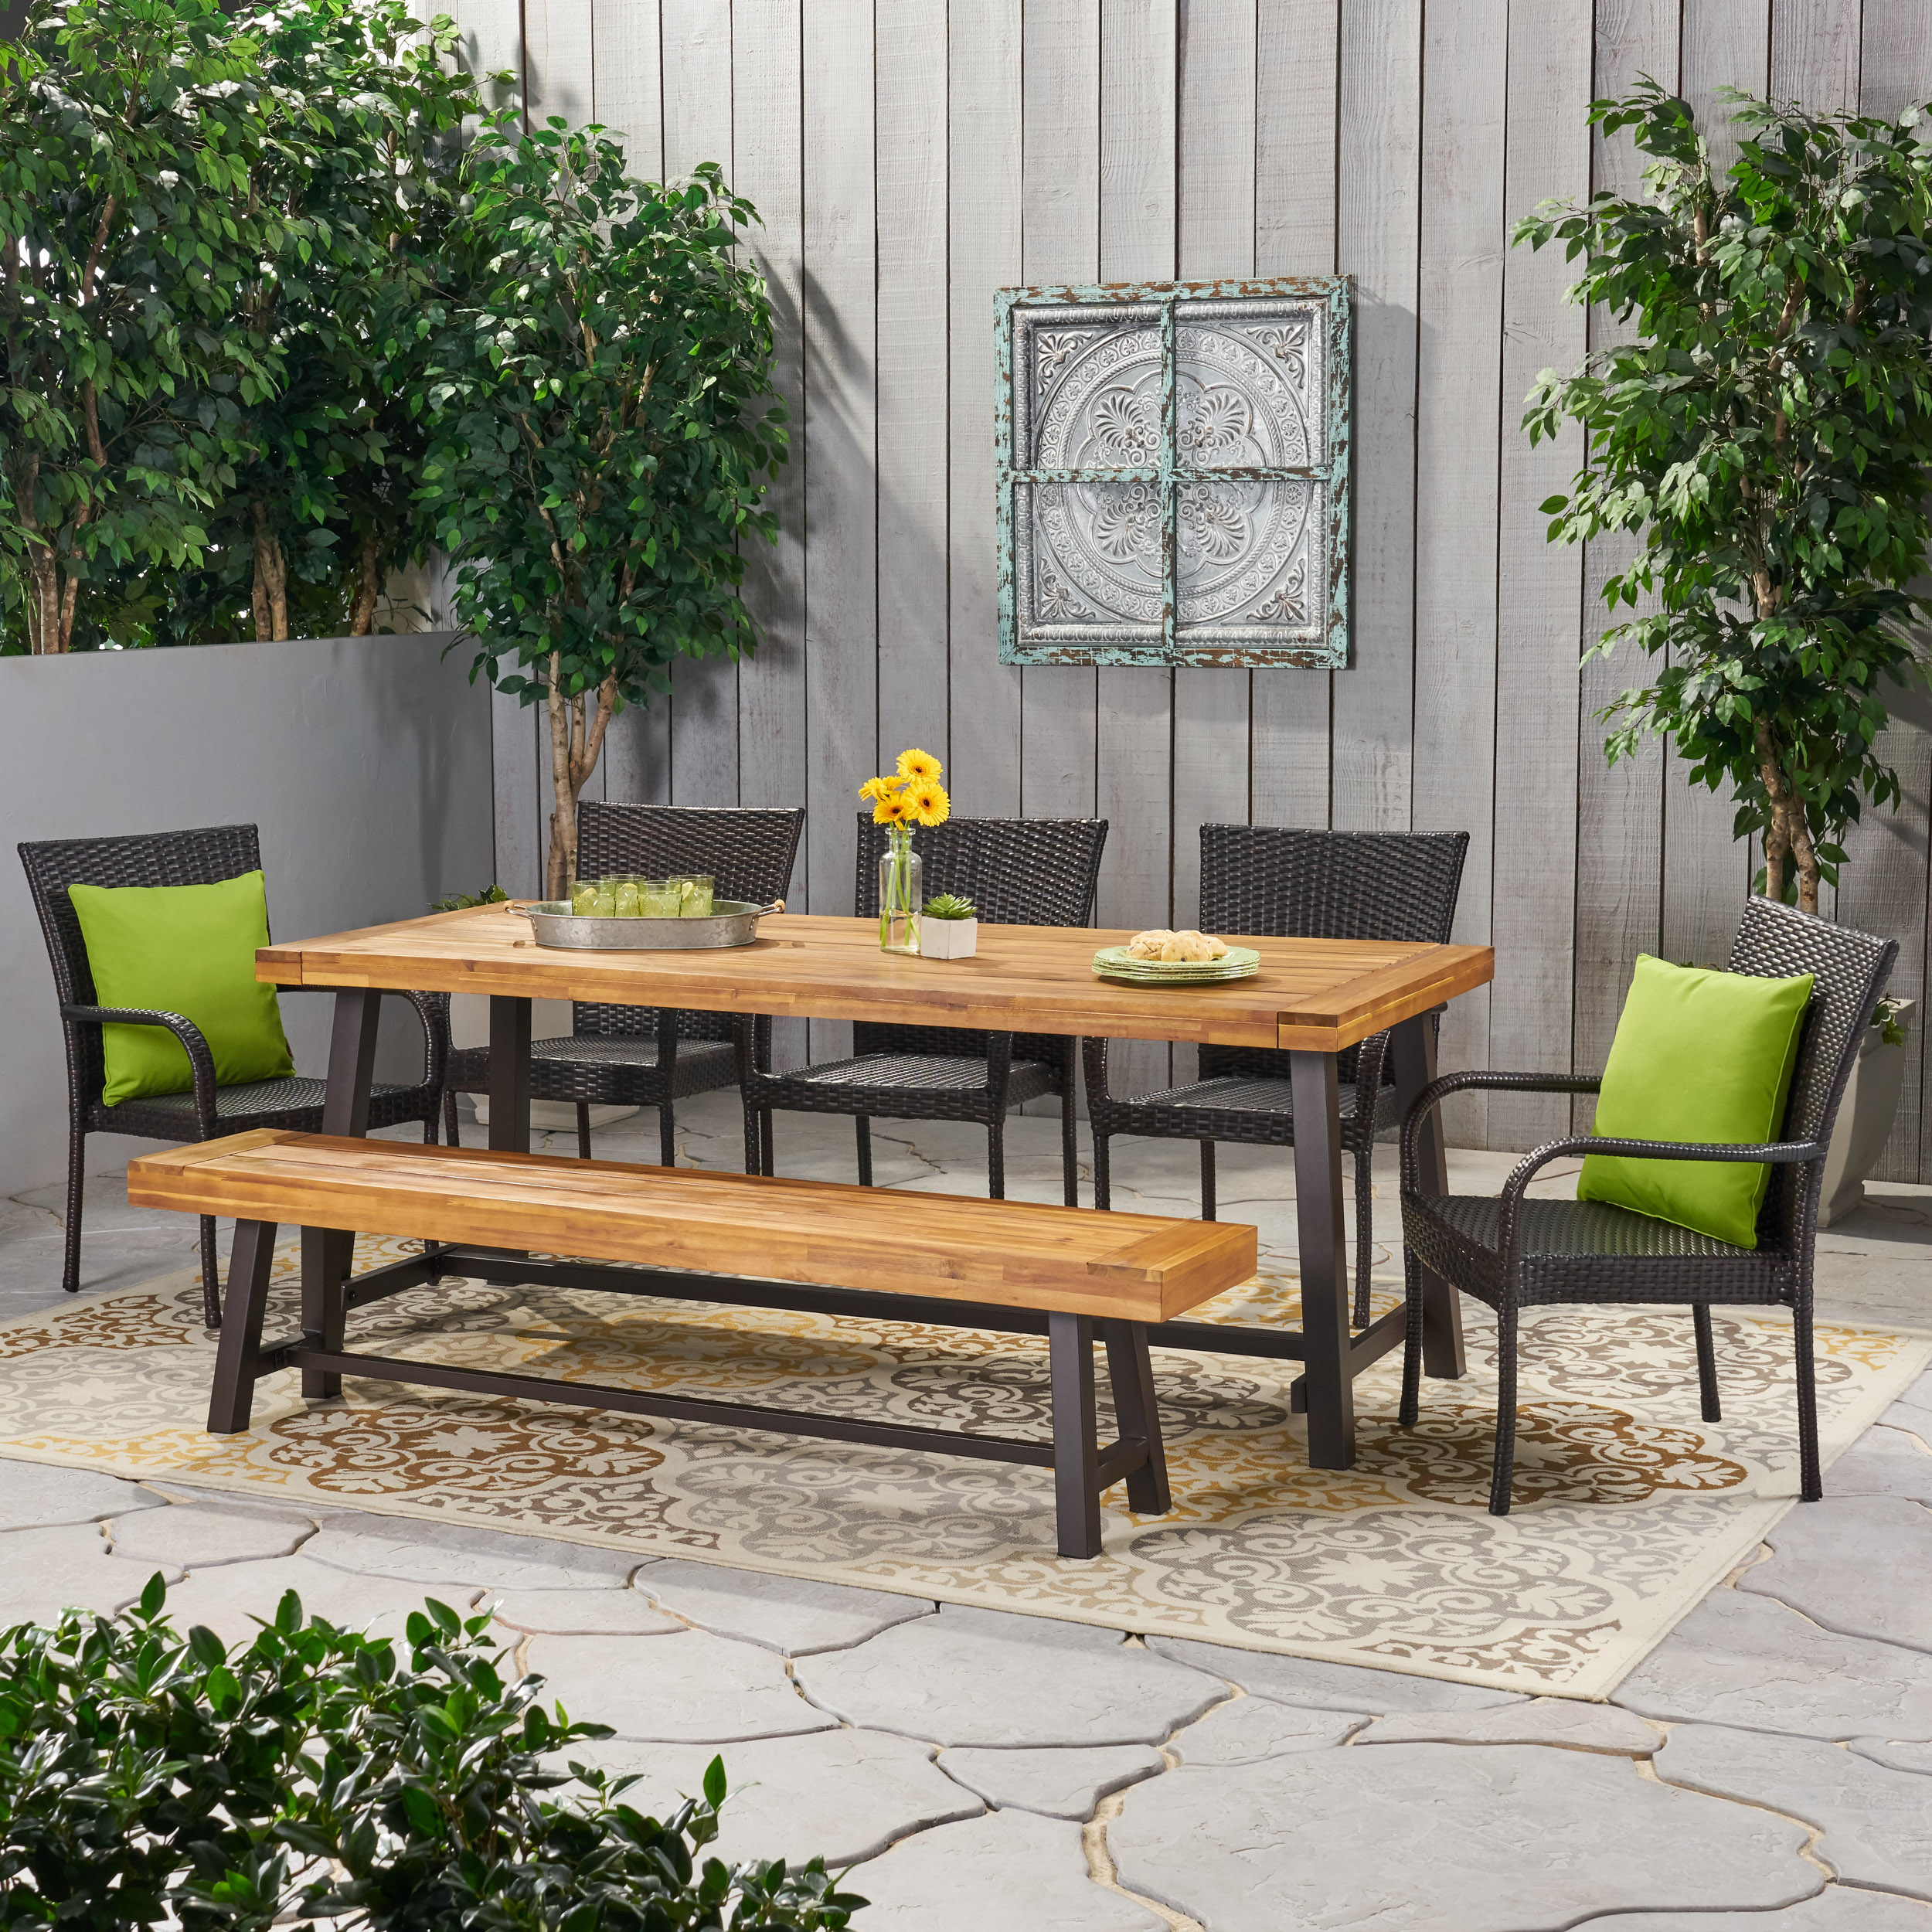 Logan Outdoor Rustic Acacia Wood 8 Seater Dining Set with Dining Bench, Teak, Black and Multi-Brown - image 1 of 10